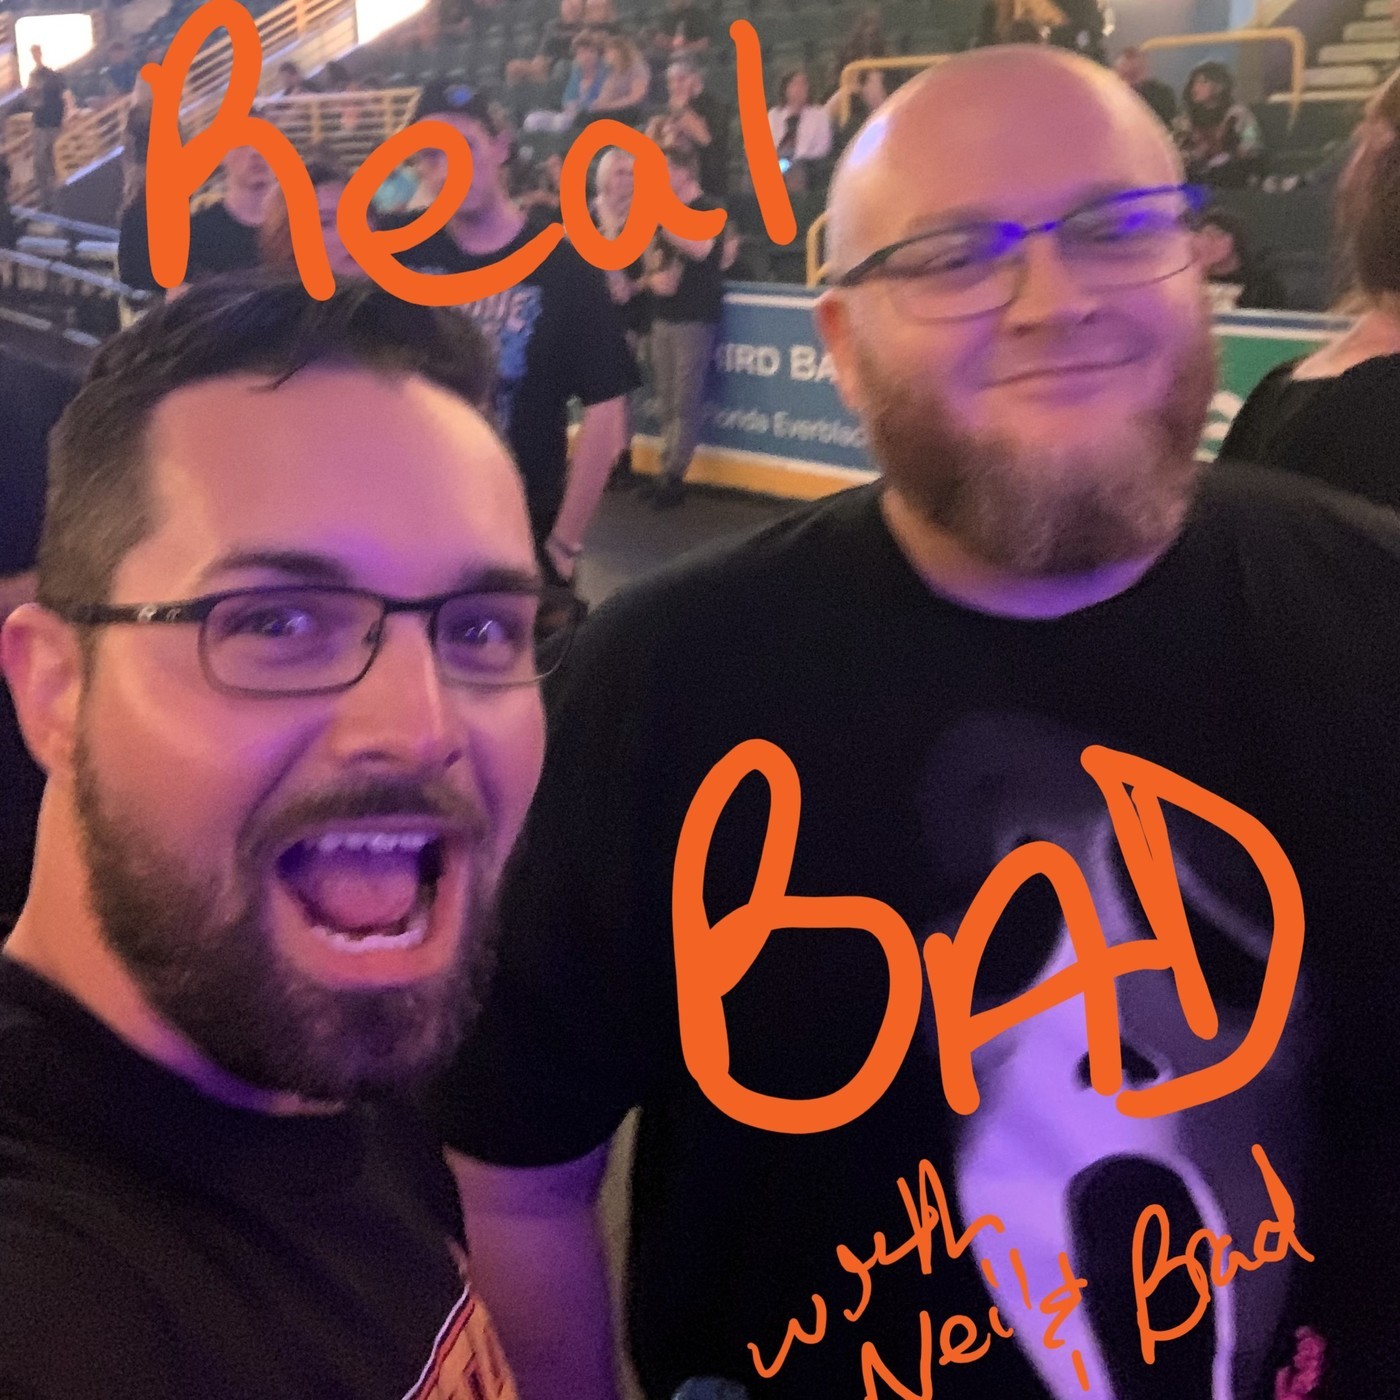 Real Bad with Neil and Brad 1: Episode 1 